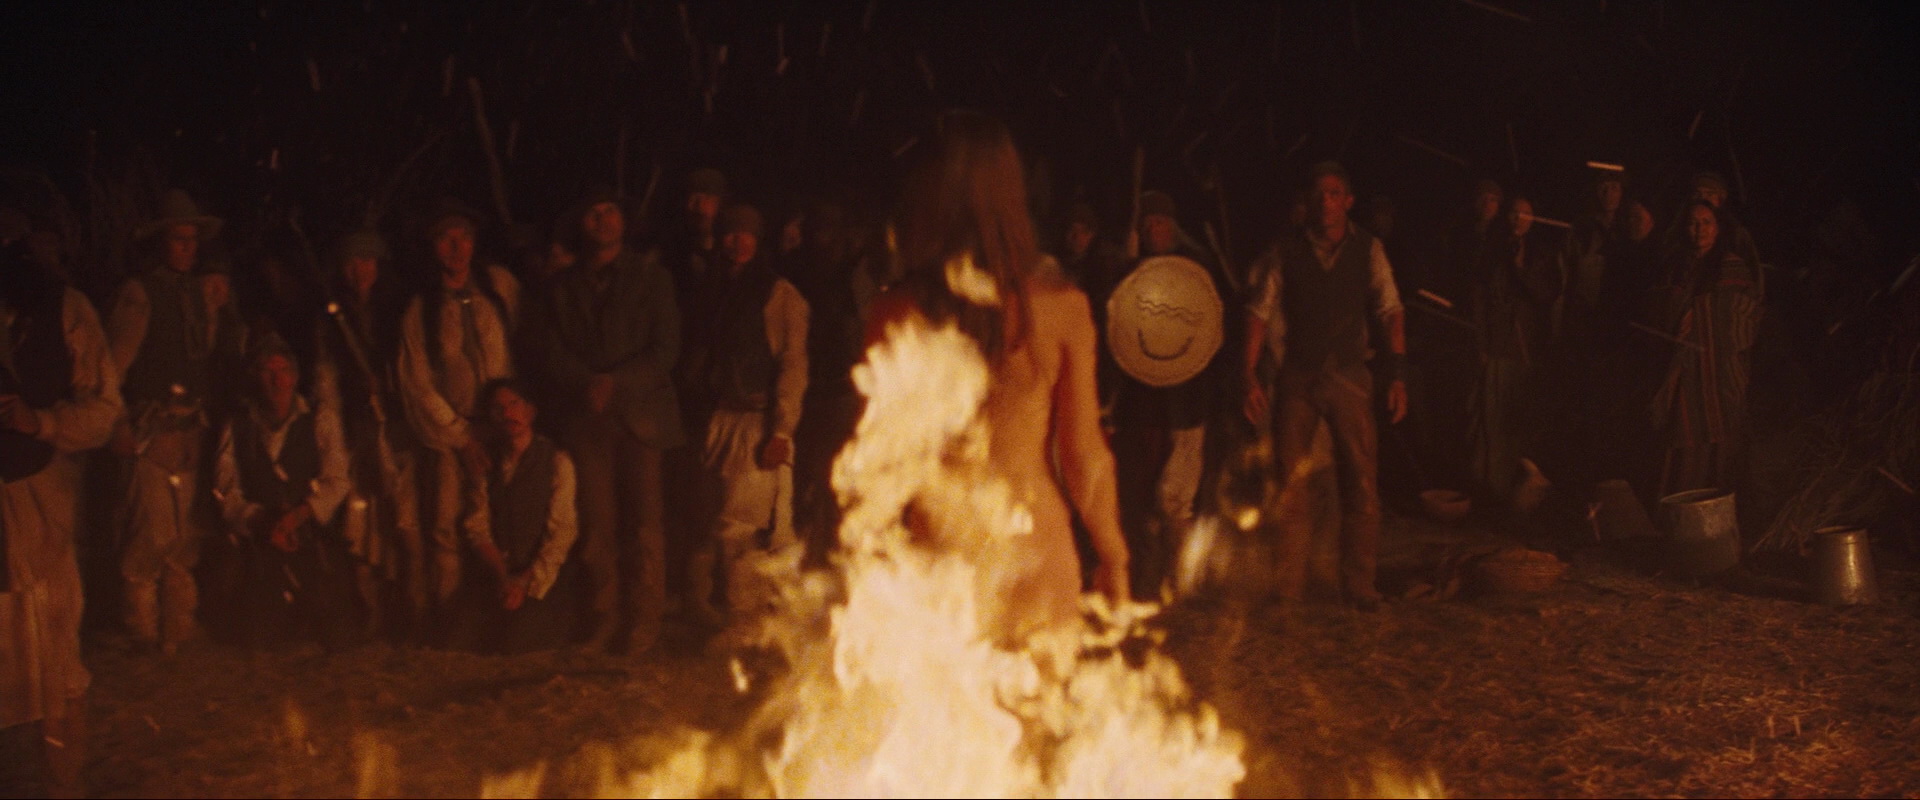 Olivia Wilde - Cowboys and Aliens (2011) HD 1080p